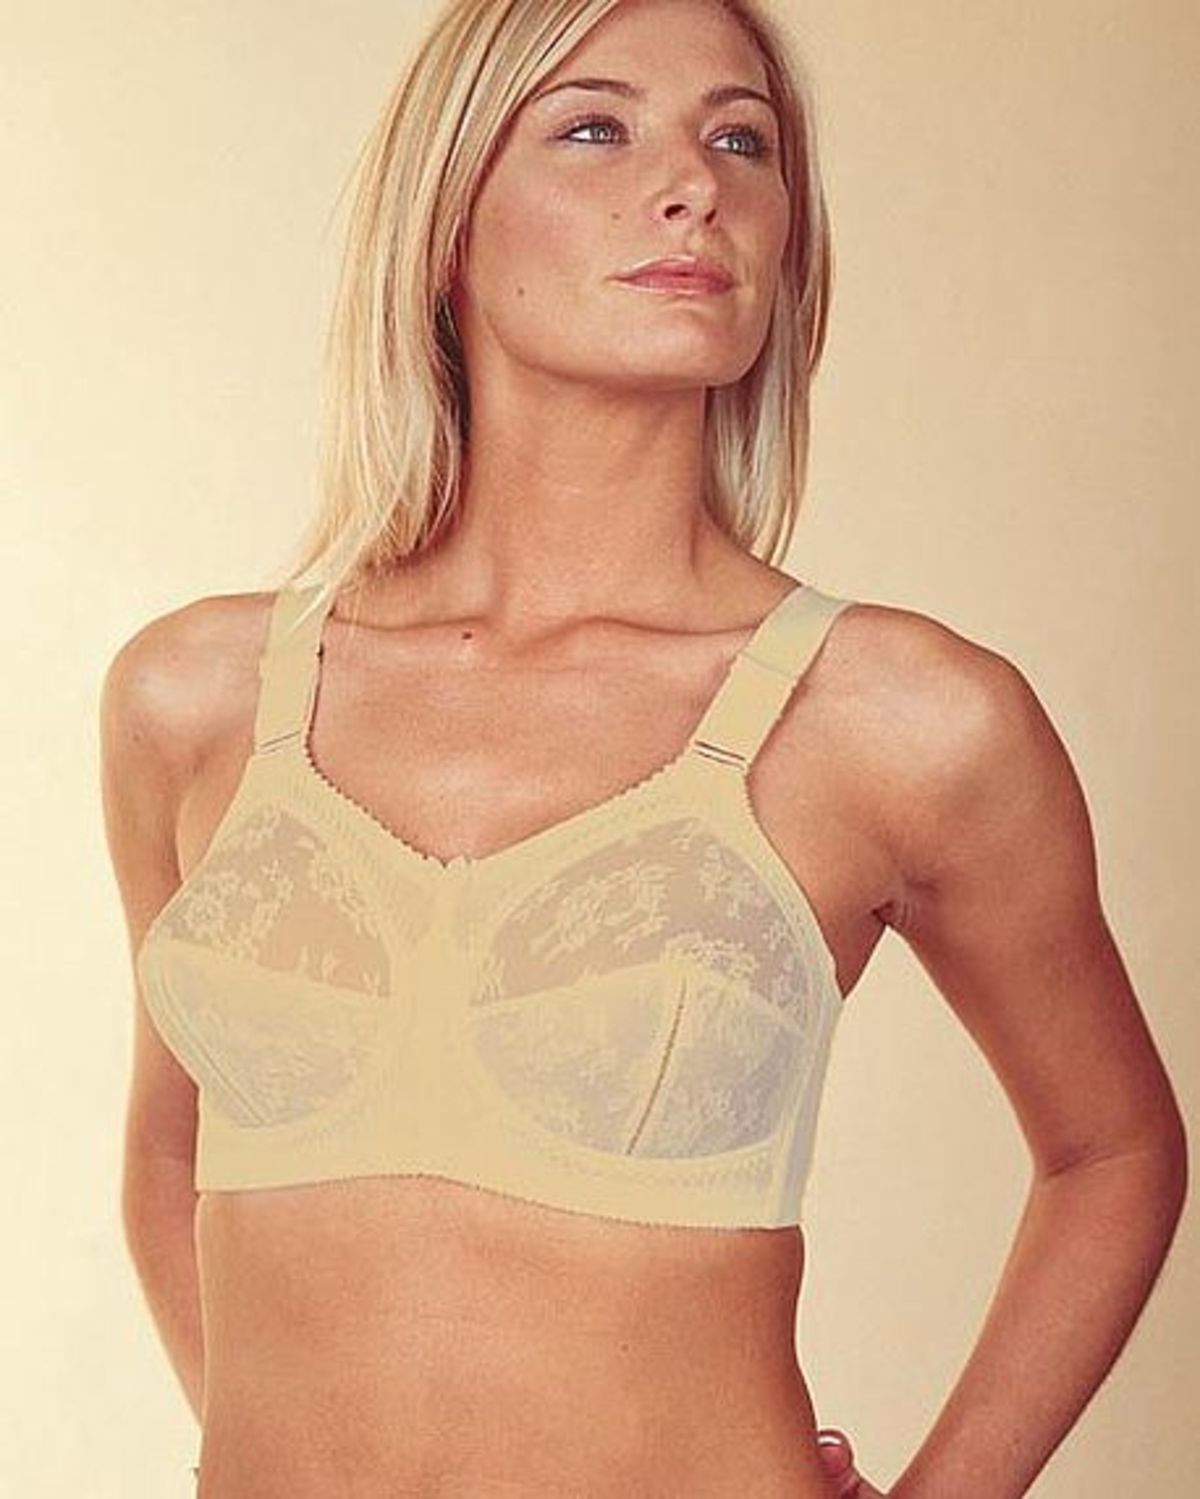 Doreen Bra in Skintone Available in Sizes 34 to 48